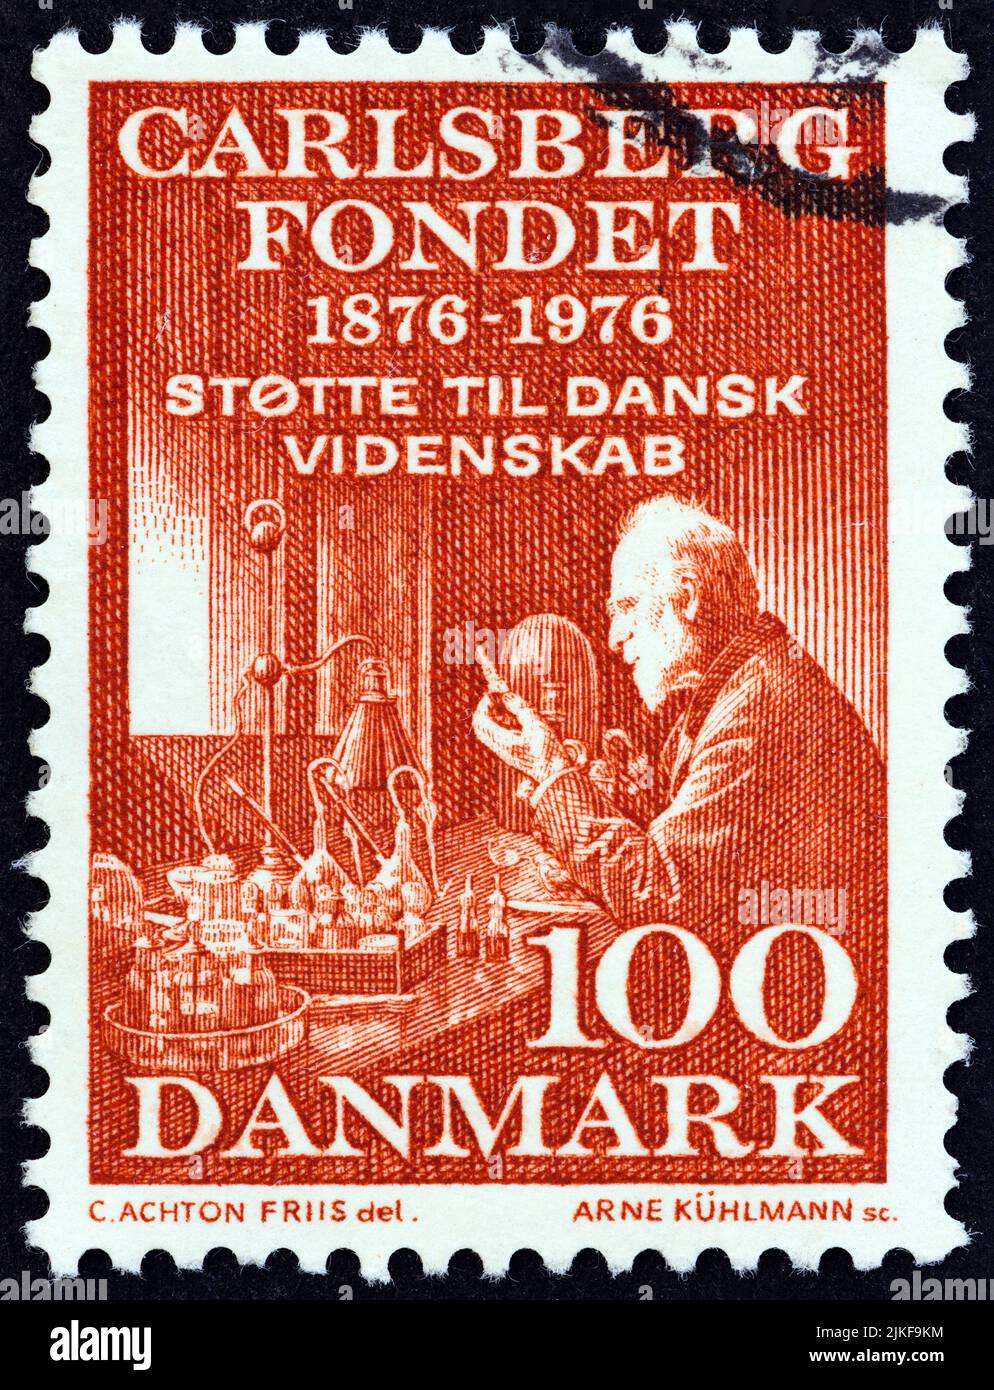 DENMARK - CIRCA 1976: A stamp printed in Denmark issued for the 100th Anniversary of the Carlsberg Foundation shows Professor Emil Hansen, circa 1976. Stock Photo